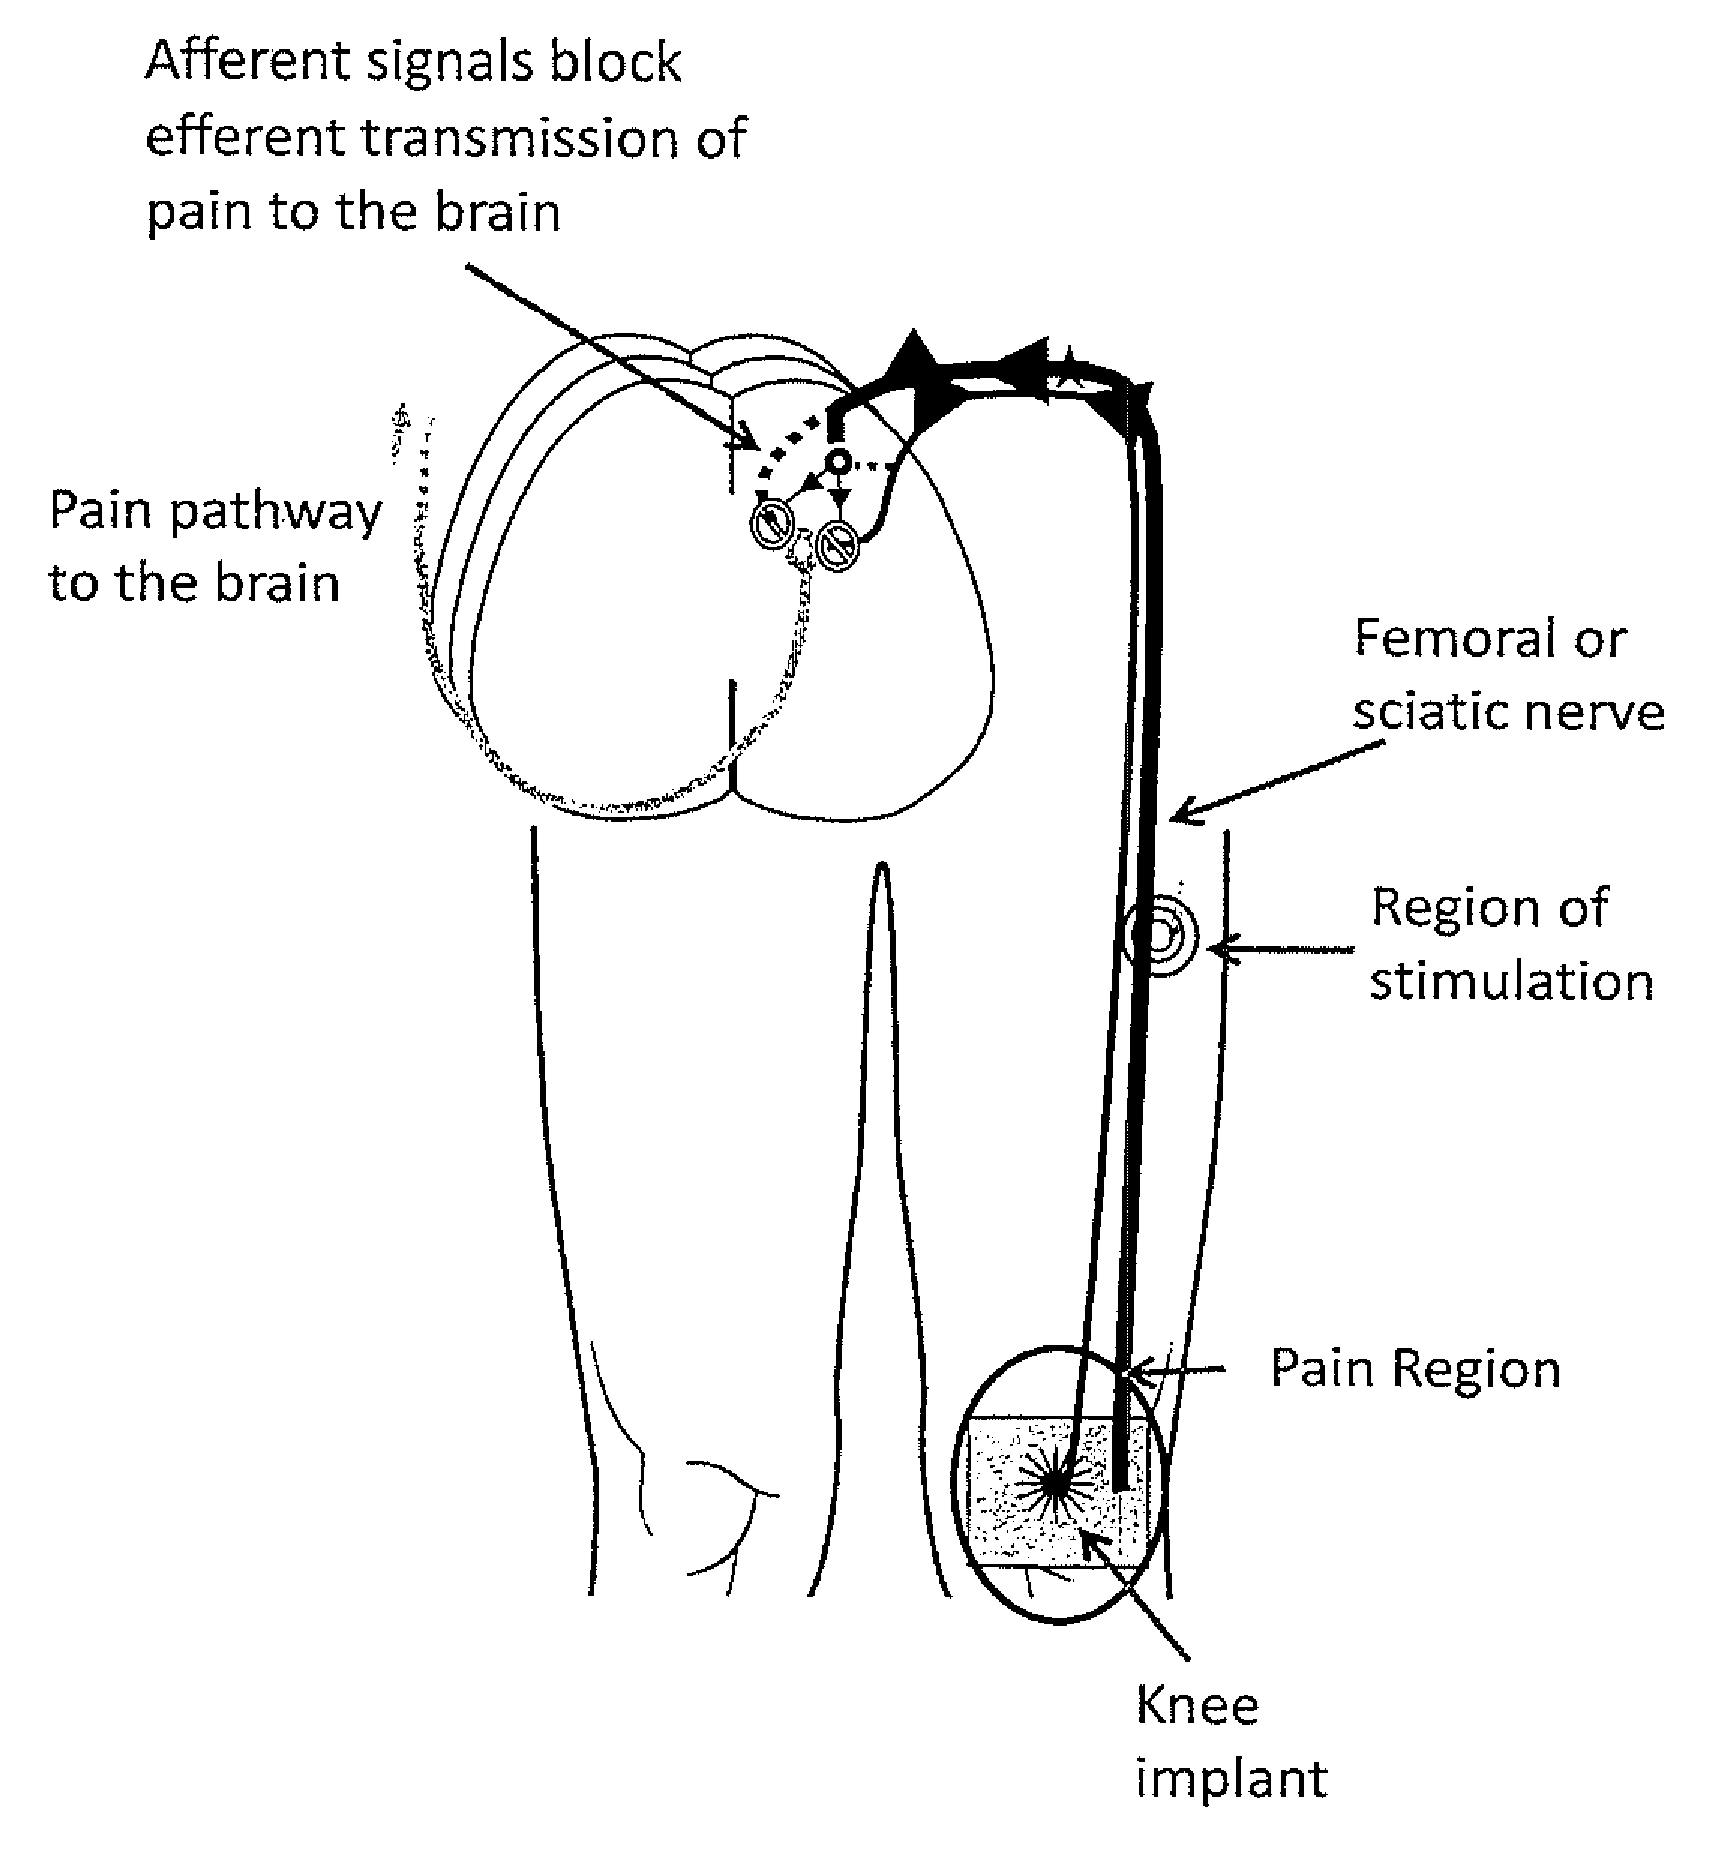 System and method for treatment of pain related to limb joint replacement surgery